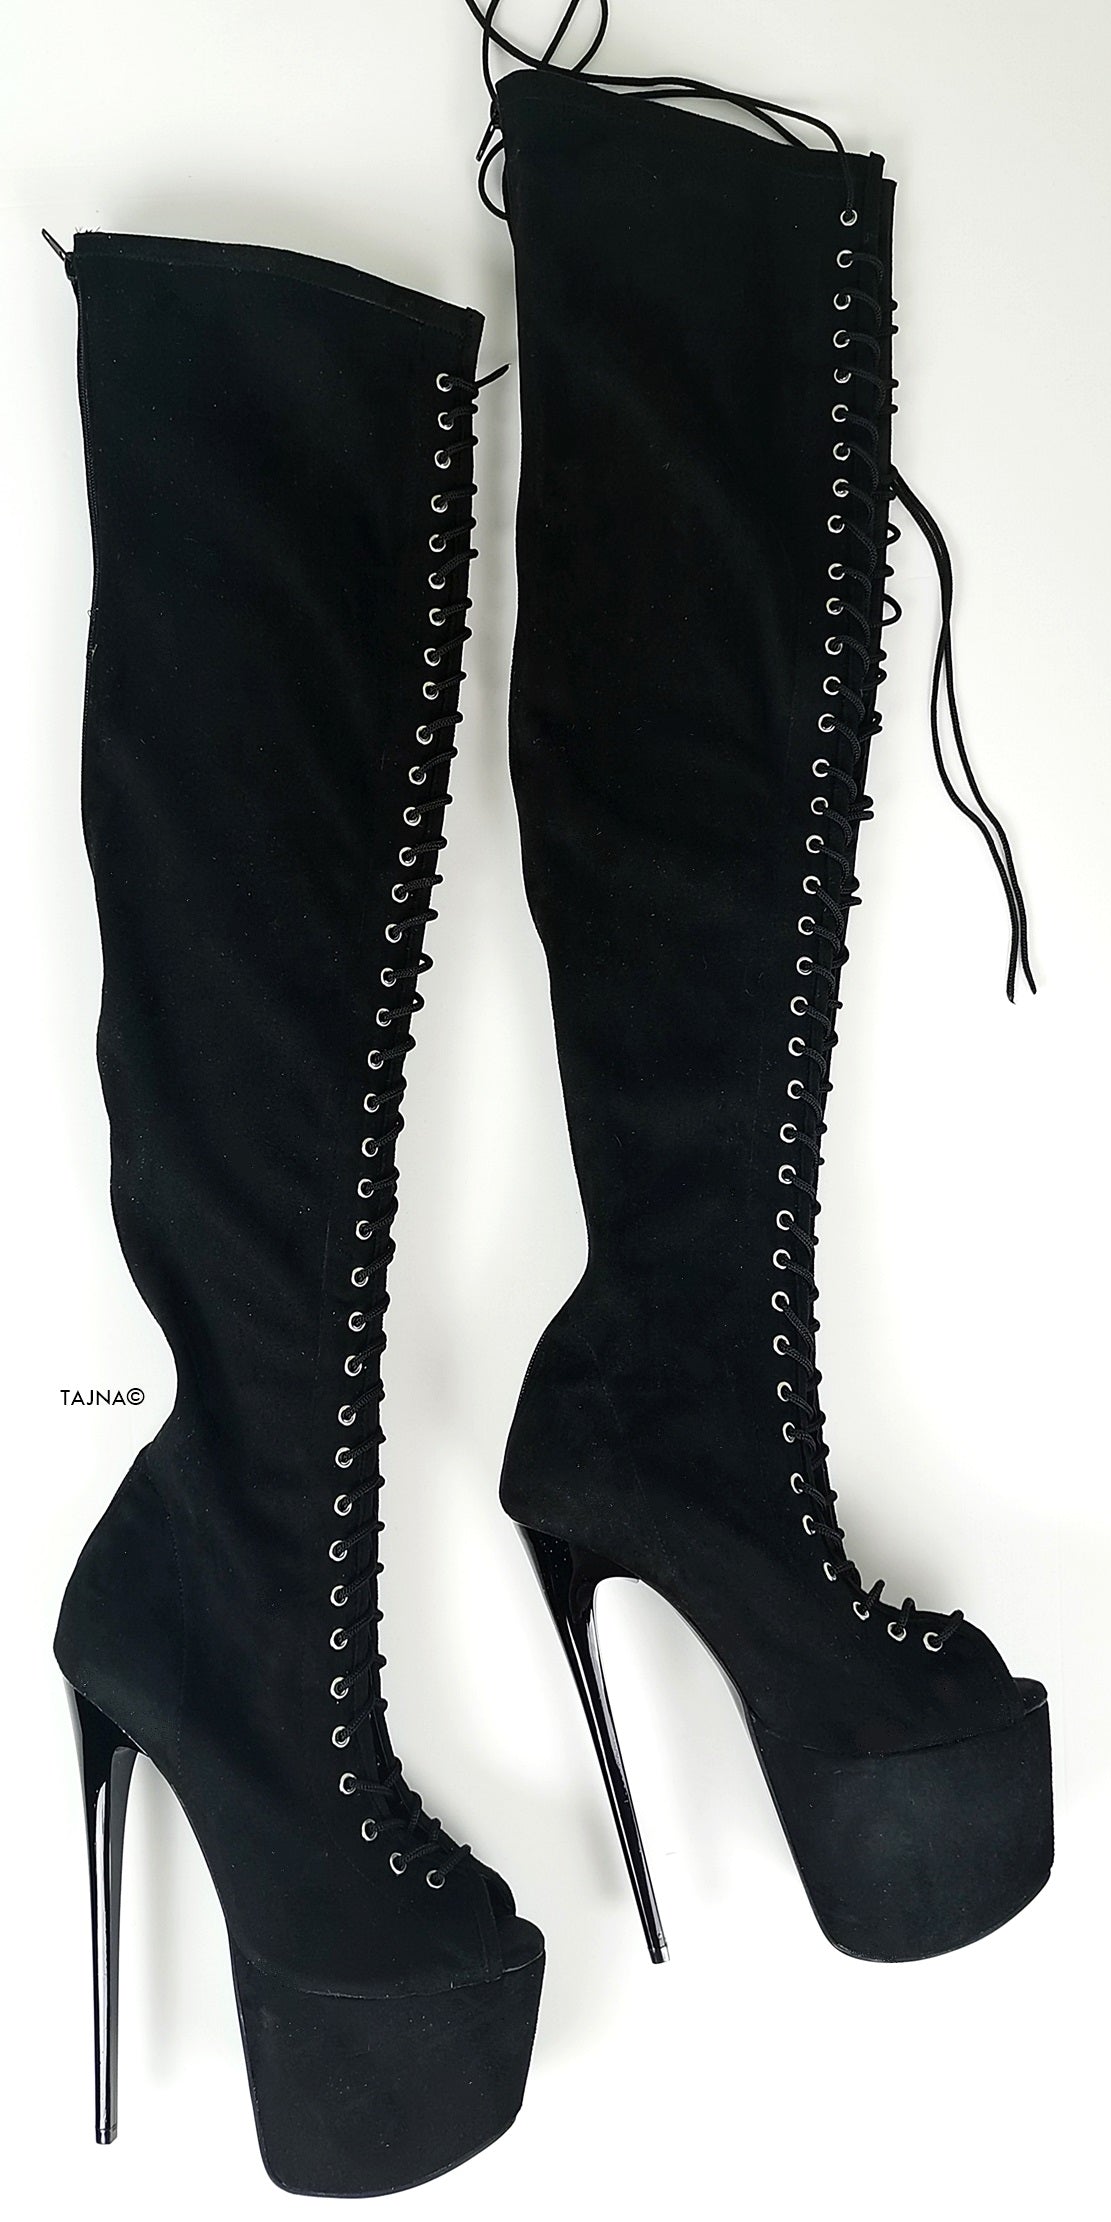 Black Suede Gladiator Lace Up Thigh High Boots - Tajna Club